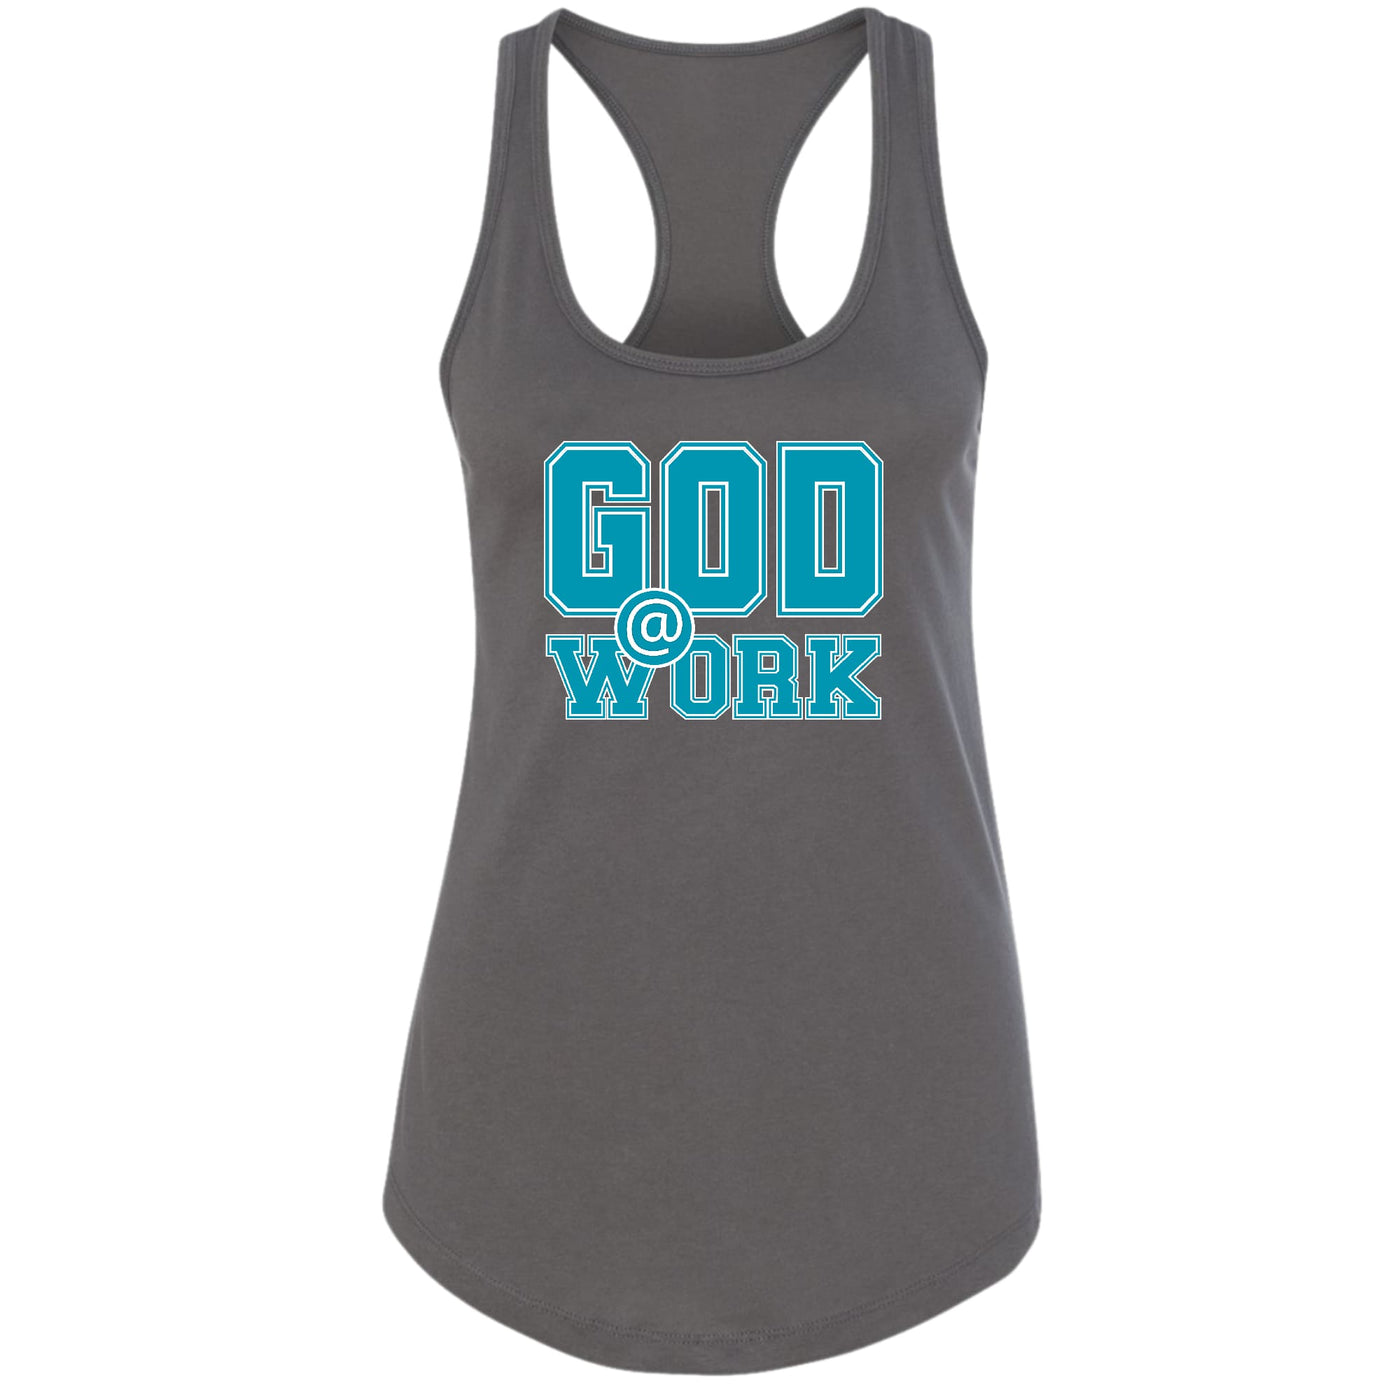 Womens Tank Top Fitness T-shirt God @ Work Blue Green And White Print - Womens